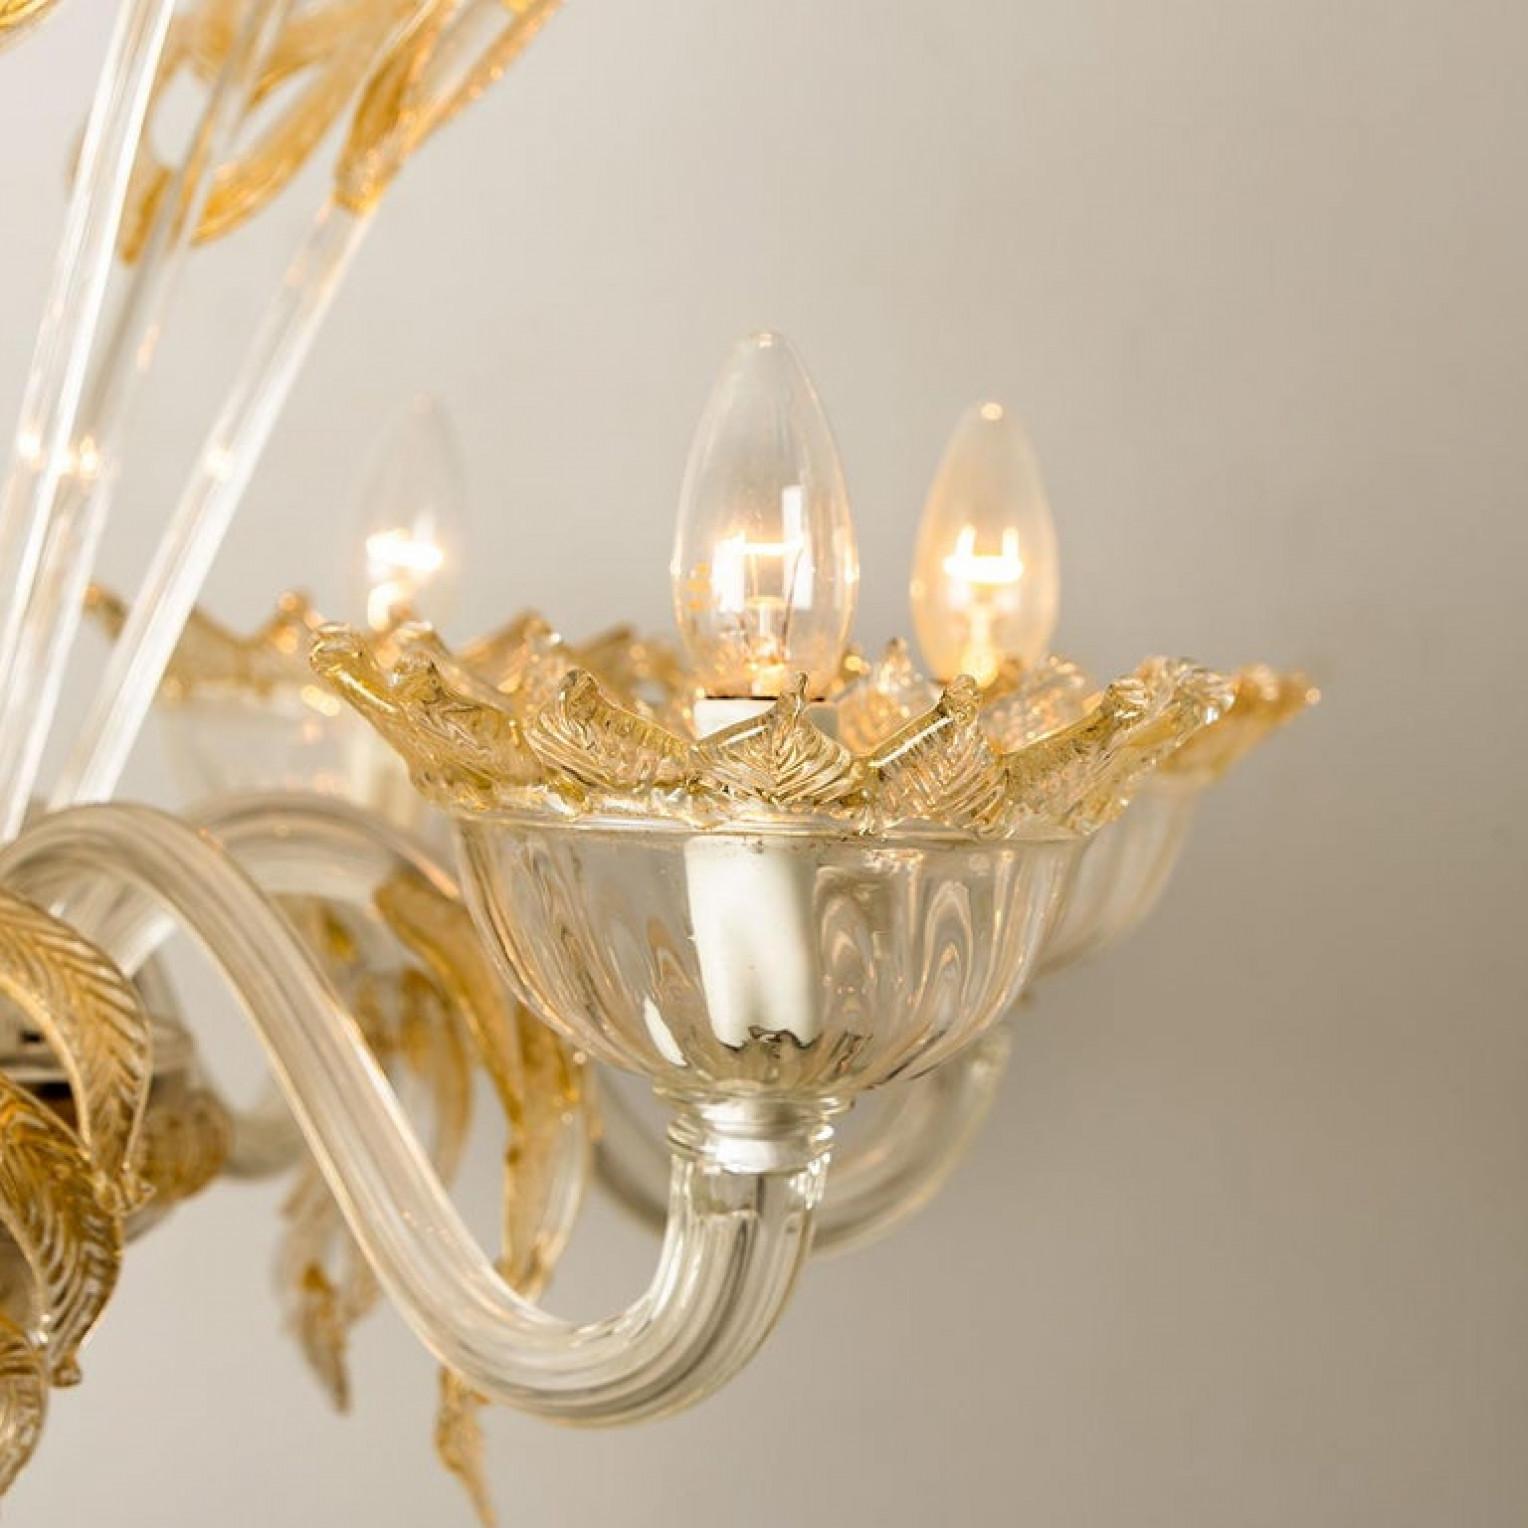 Large Venetian Chandelier in Gilded Murano Glass, by Barovier, 1950s For Sale 5